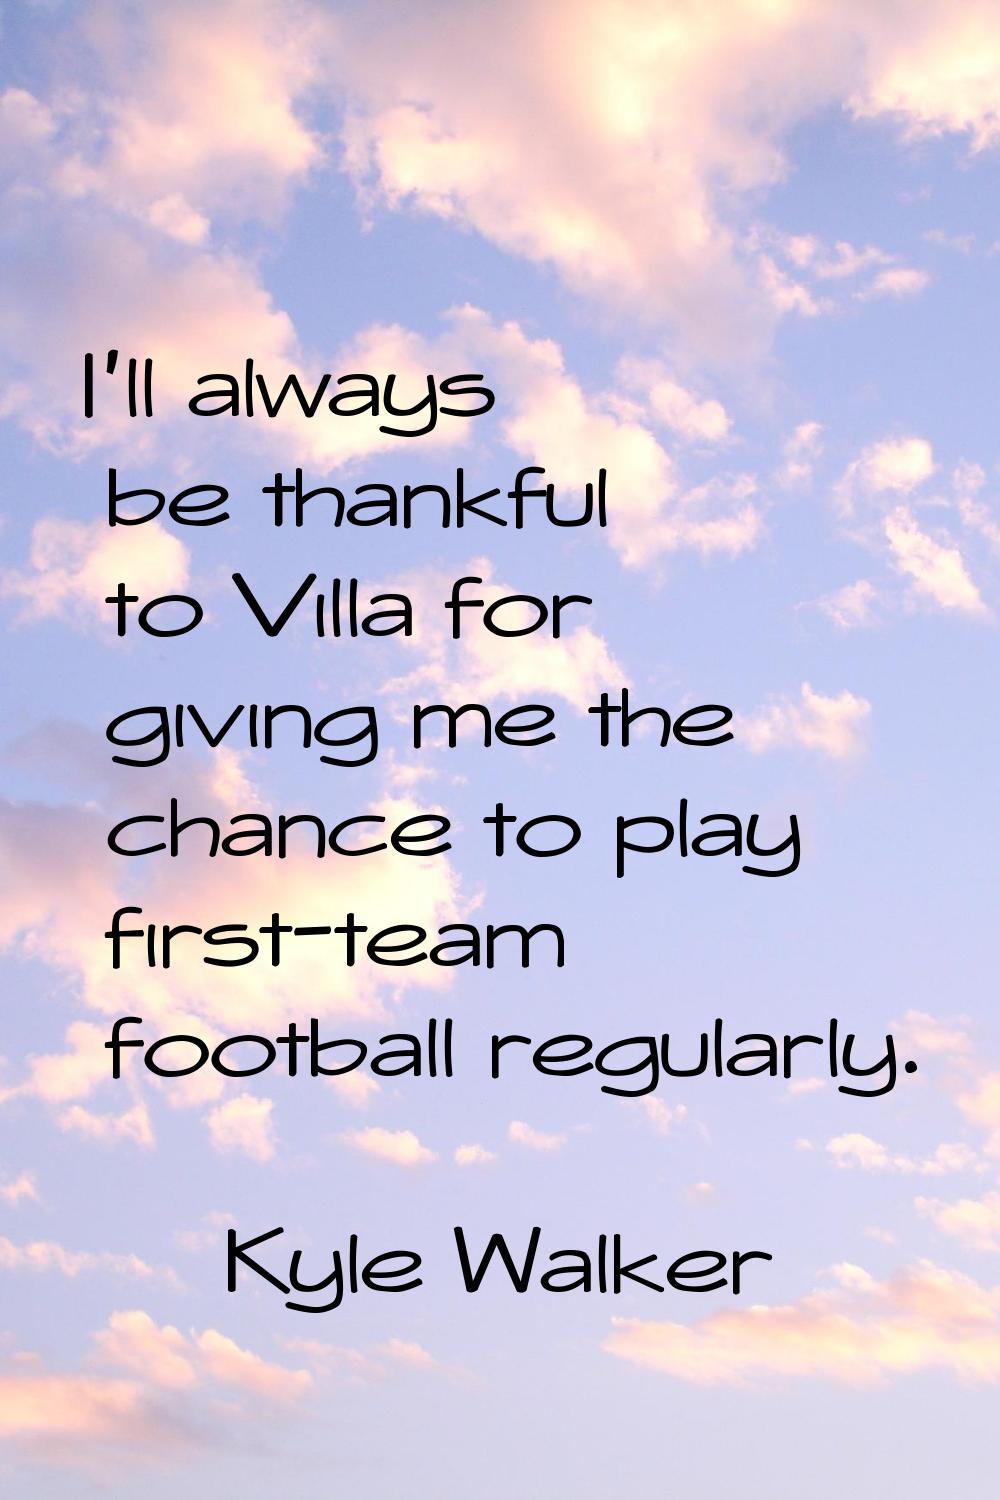 I'll always be thankful to Villa for giving me the chance to play first-team football regularly.